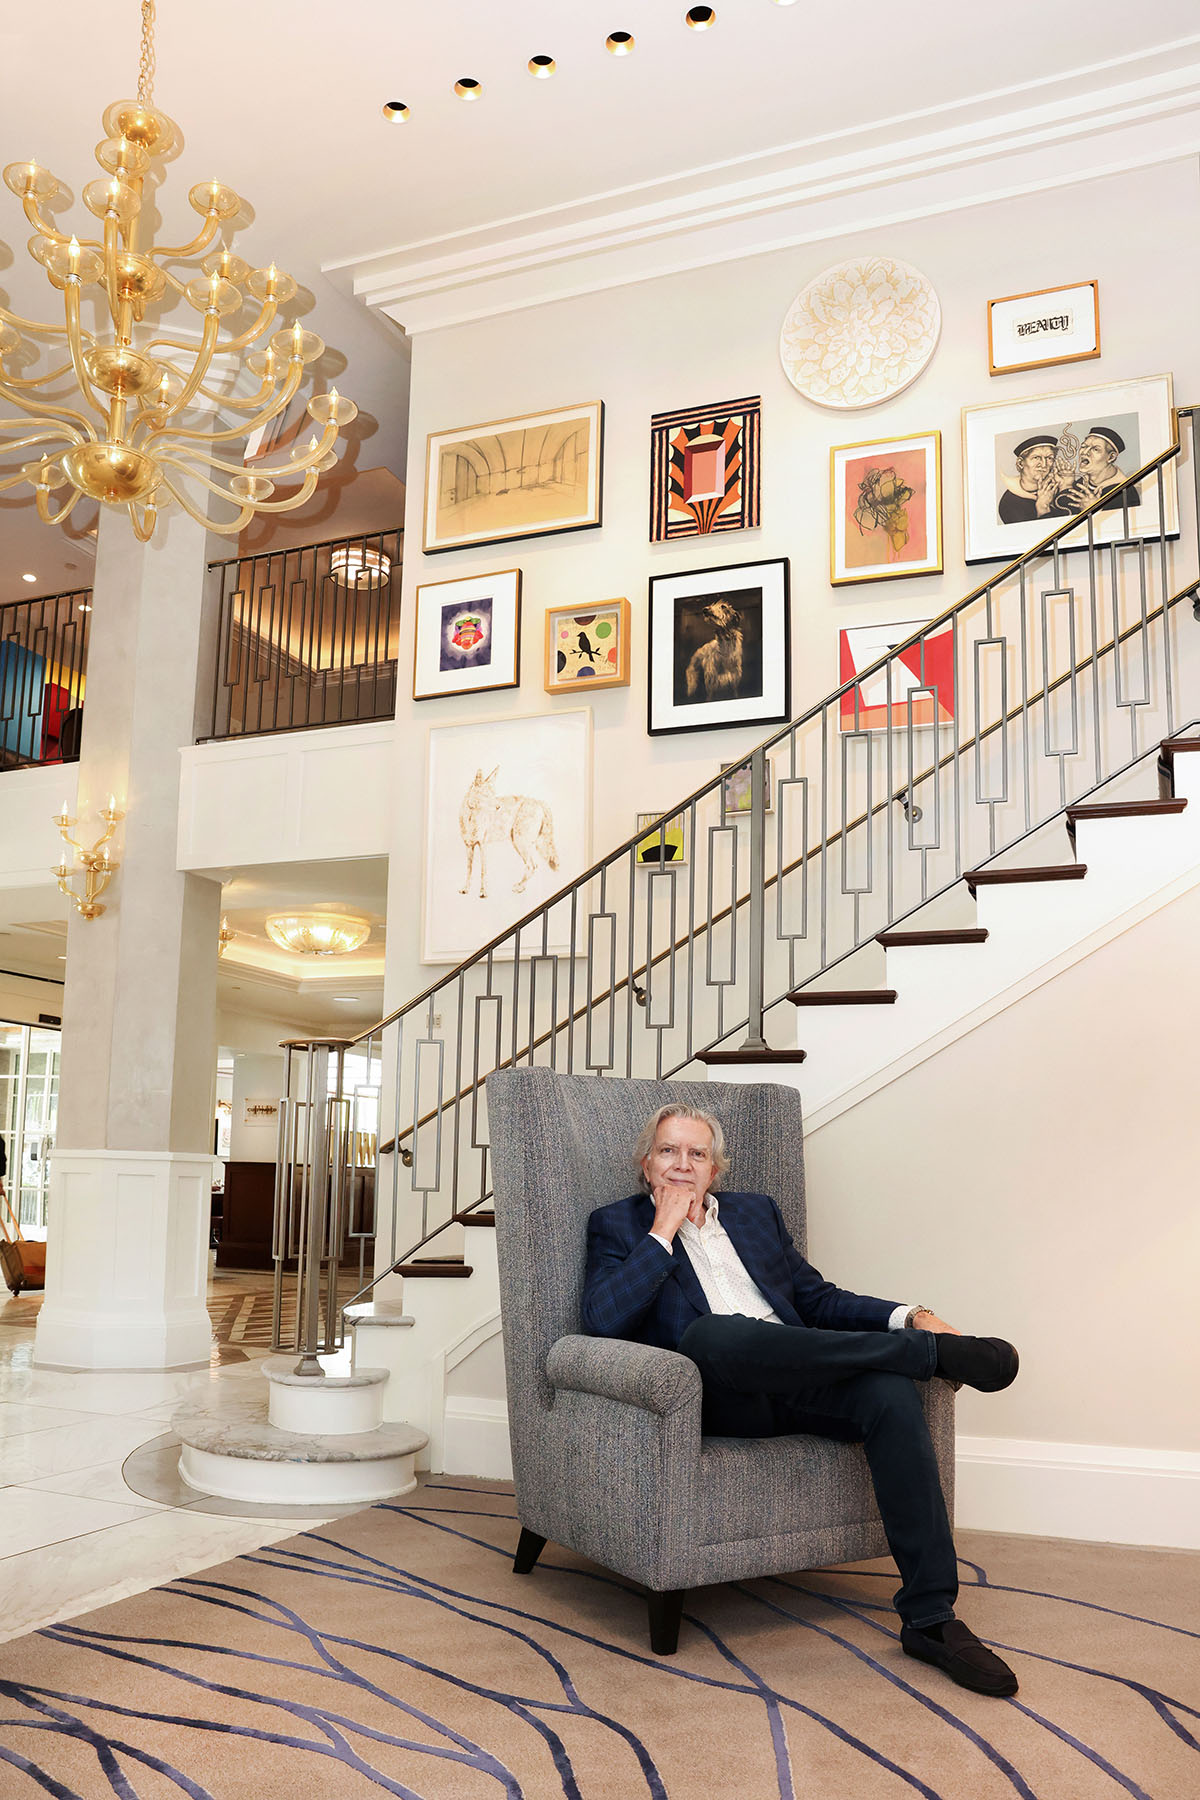 Jay Shinn sits in a gray armchair, a staircase and white wall covered in framed art behind him.